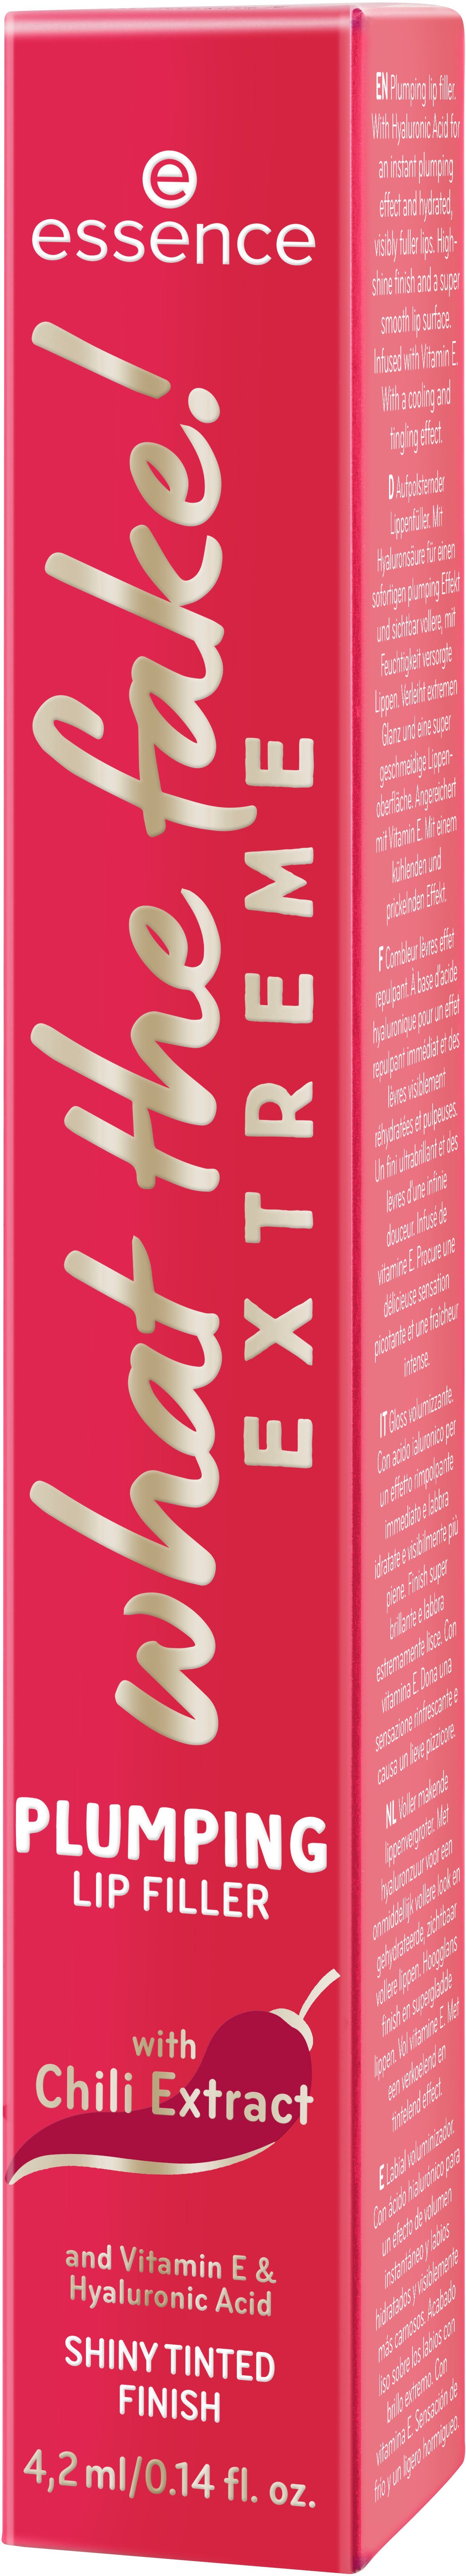 fake! what Lip-Booster LIP 3-tlg. Essence EXTREME FILLER, PLUMPING the